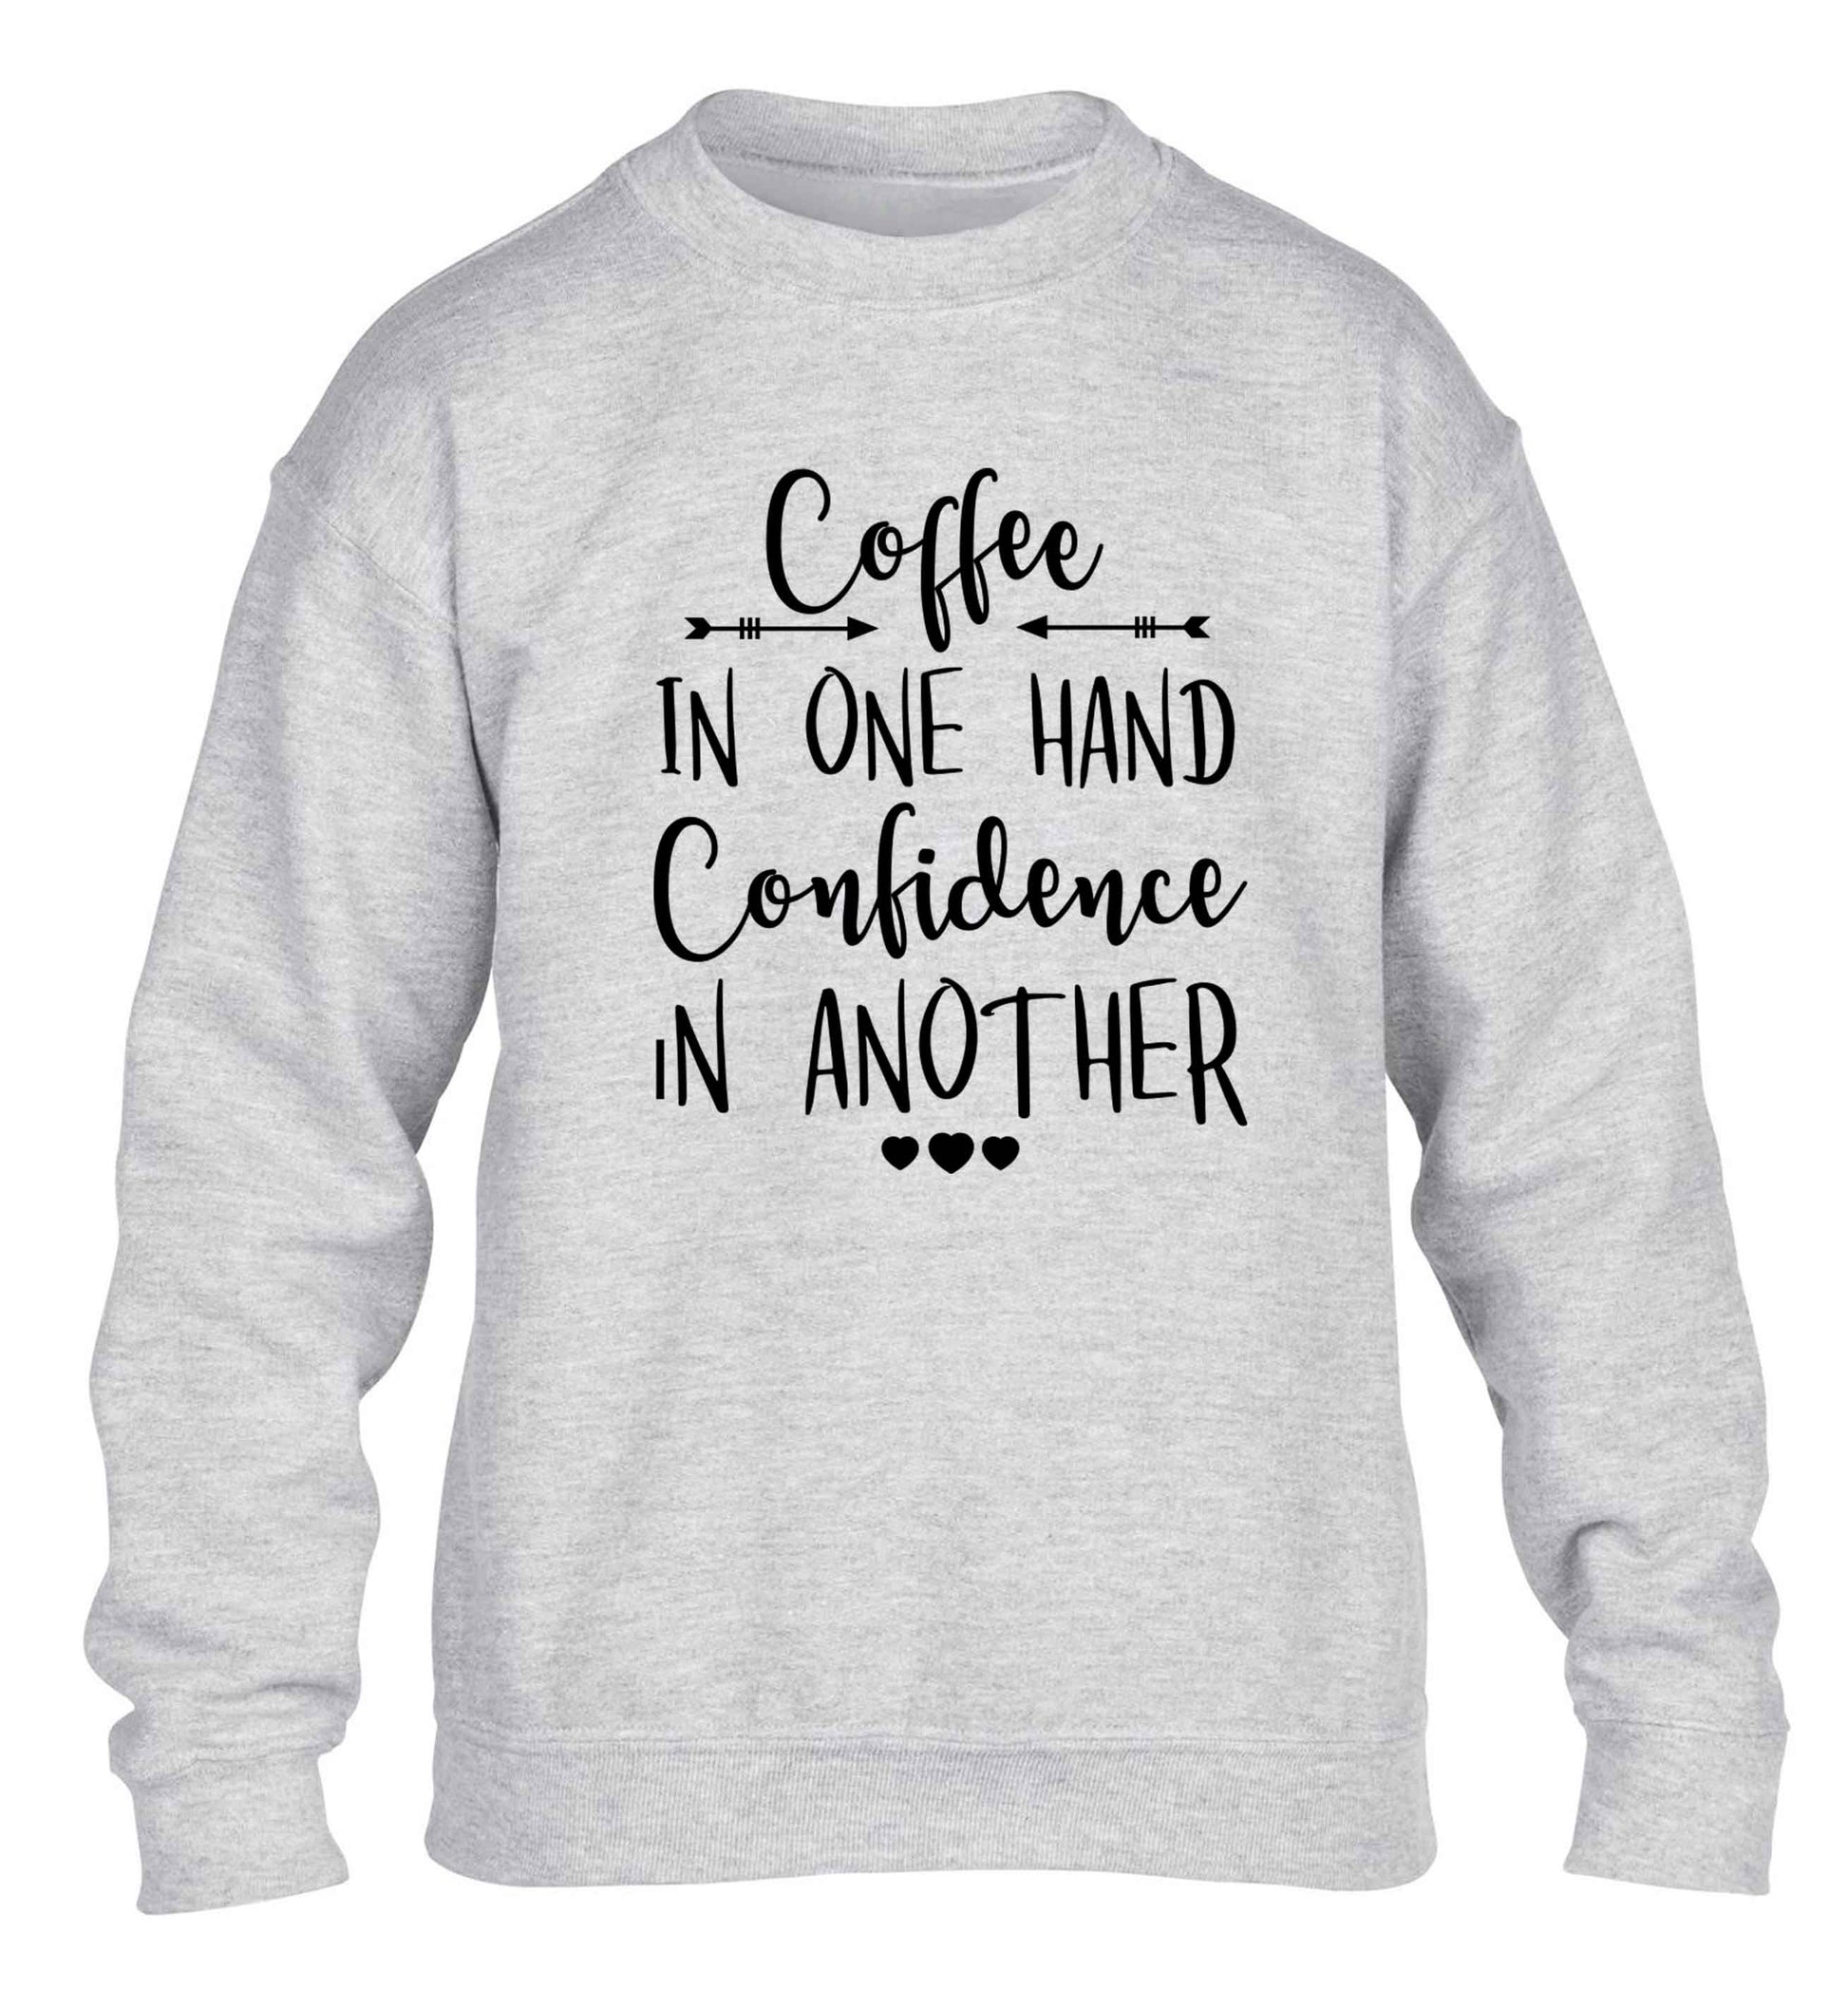 Coffee in one hand confidence in the other children's grey sweater 12-13 Years